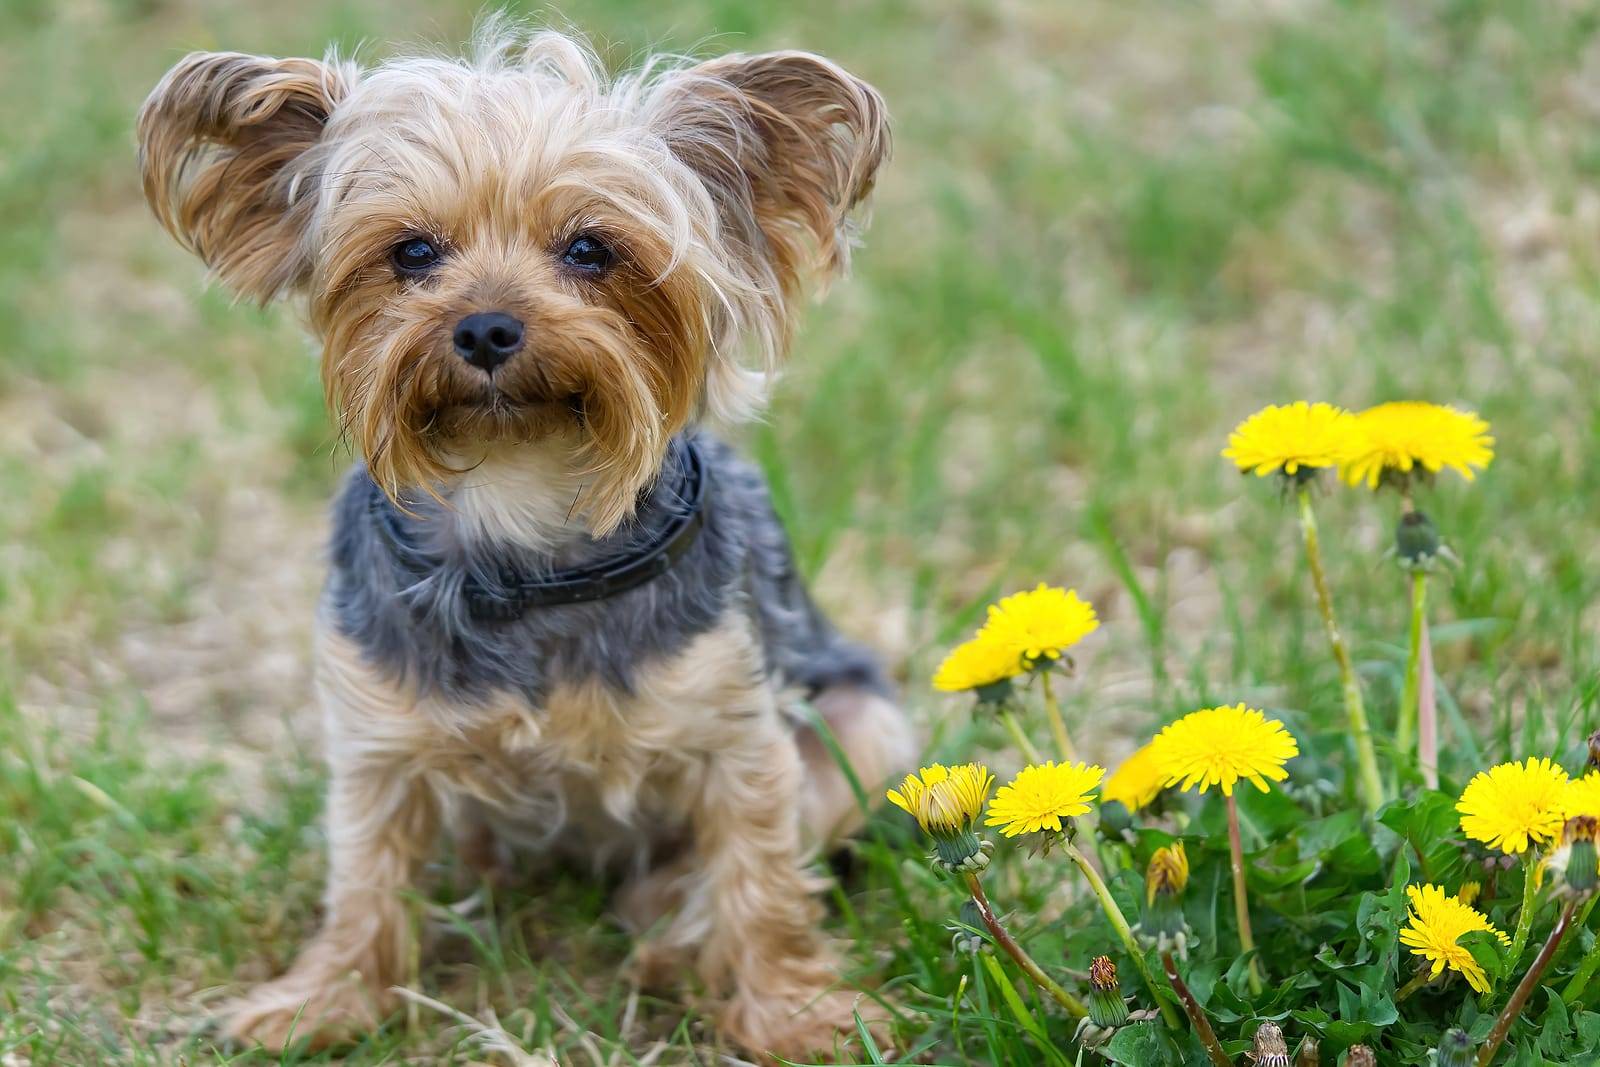 How To Train A Yorkshire Terrier The Basics (3)